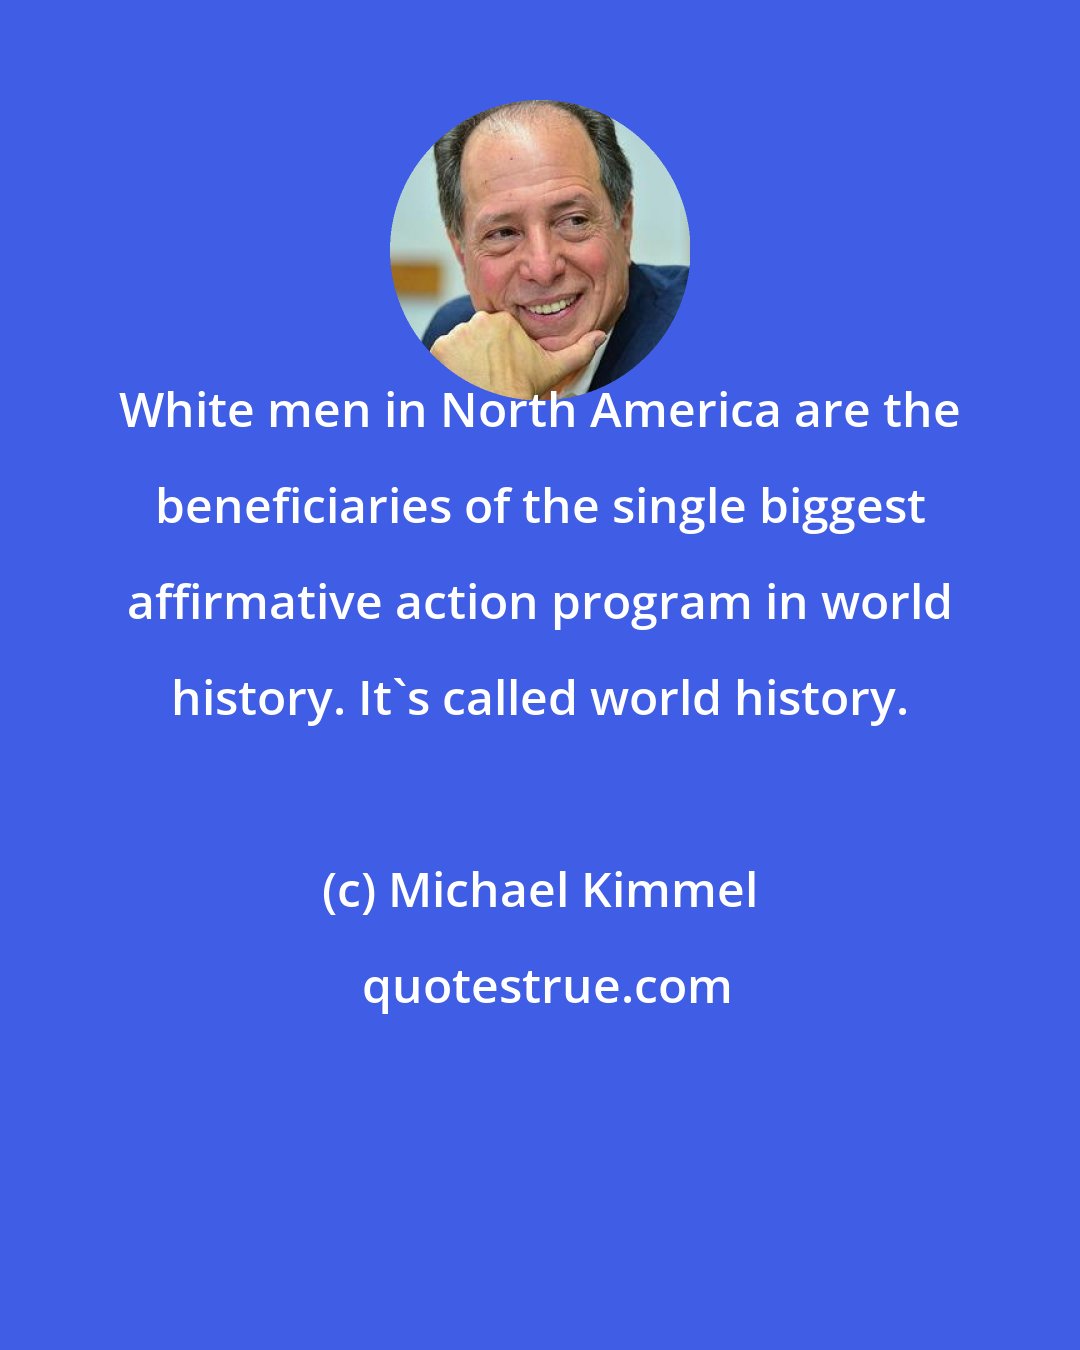 Michael Kimmel: White men in North America are the beneficiaries of the single biggest affirmative action program in world history. It's called world history.